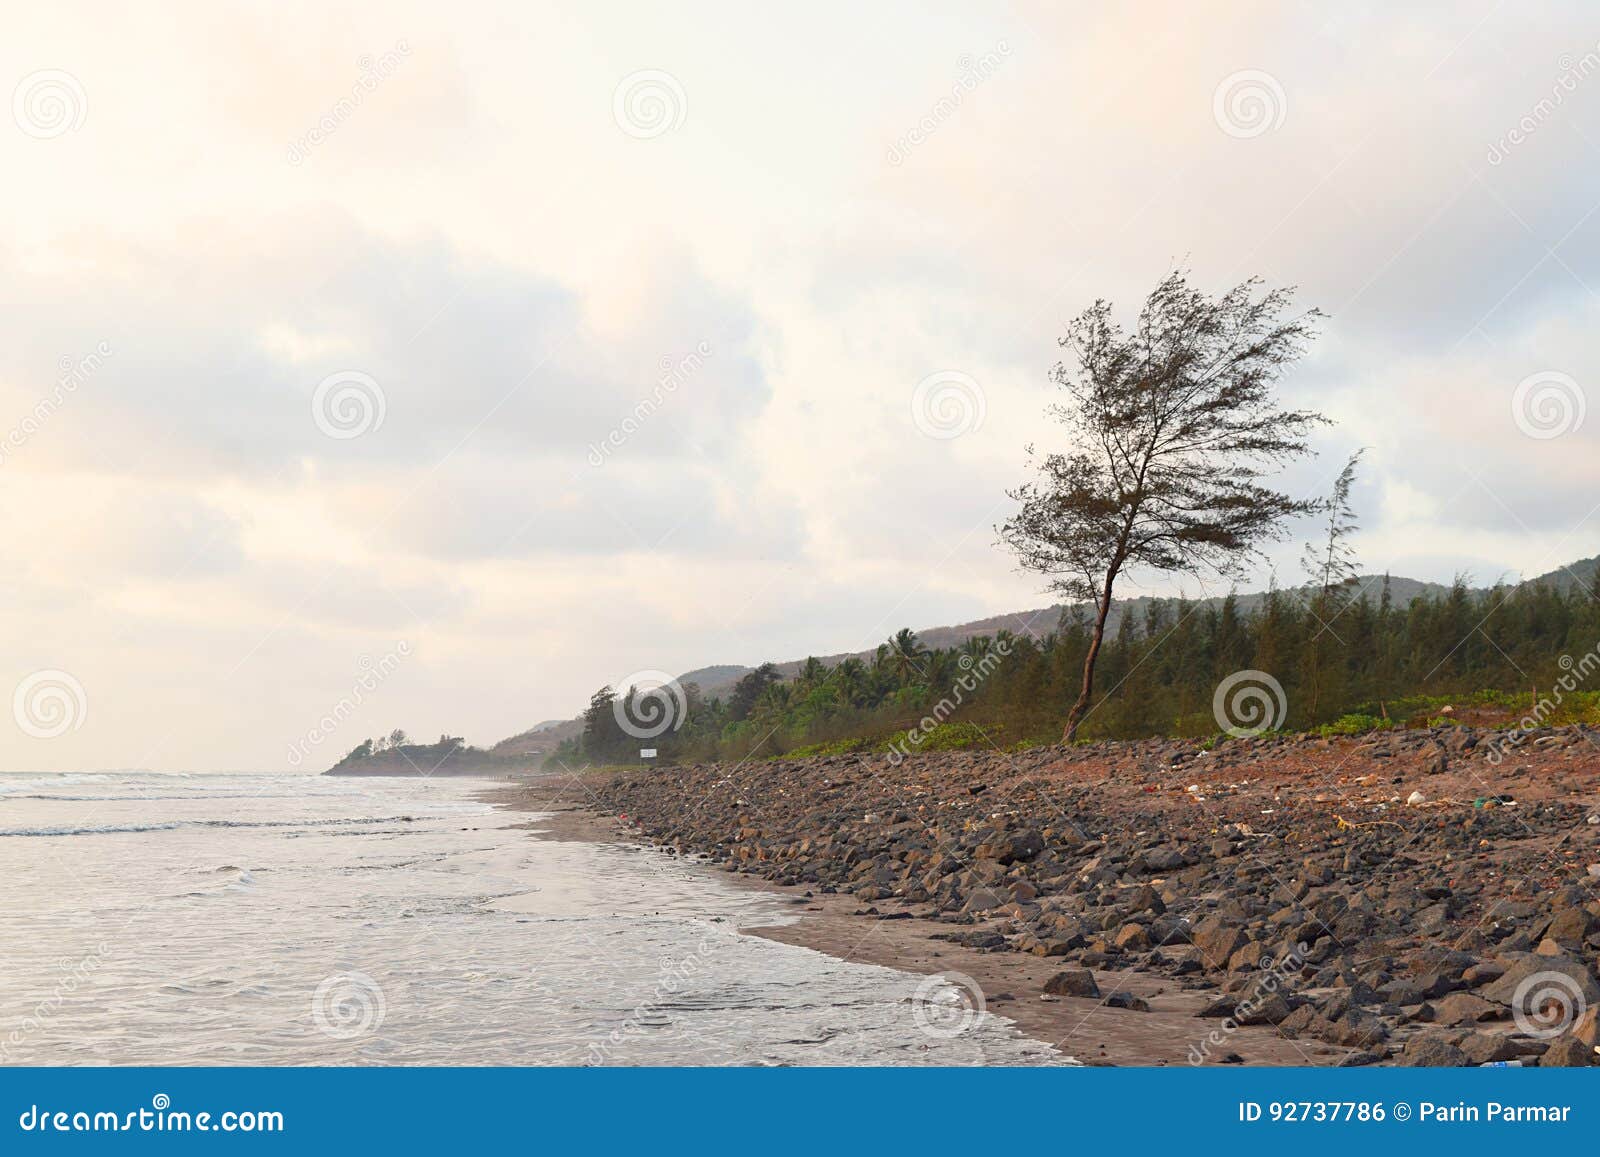 Beach Holidays Vacation Background  Peaceful Serene Morning Sunrise On  Beach Stock Photo Picture And Royalty Free Image Image 64221642